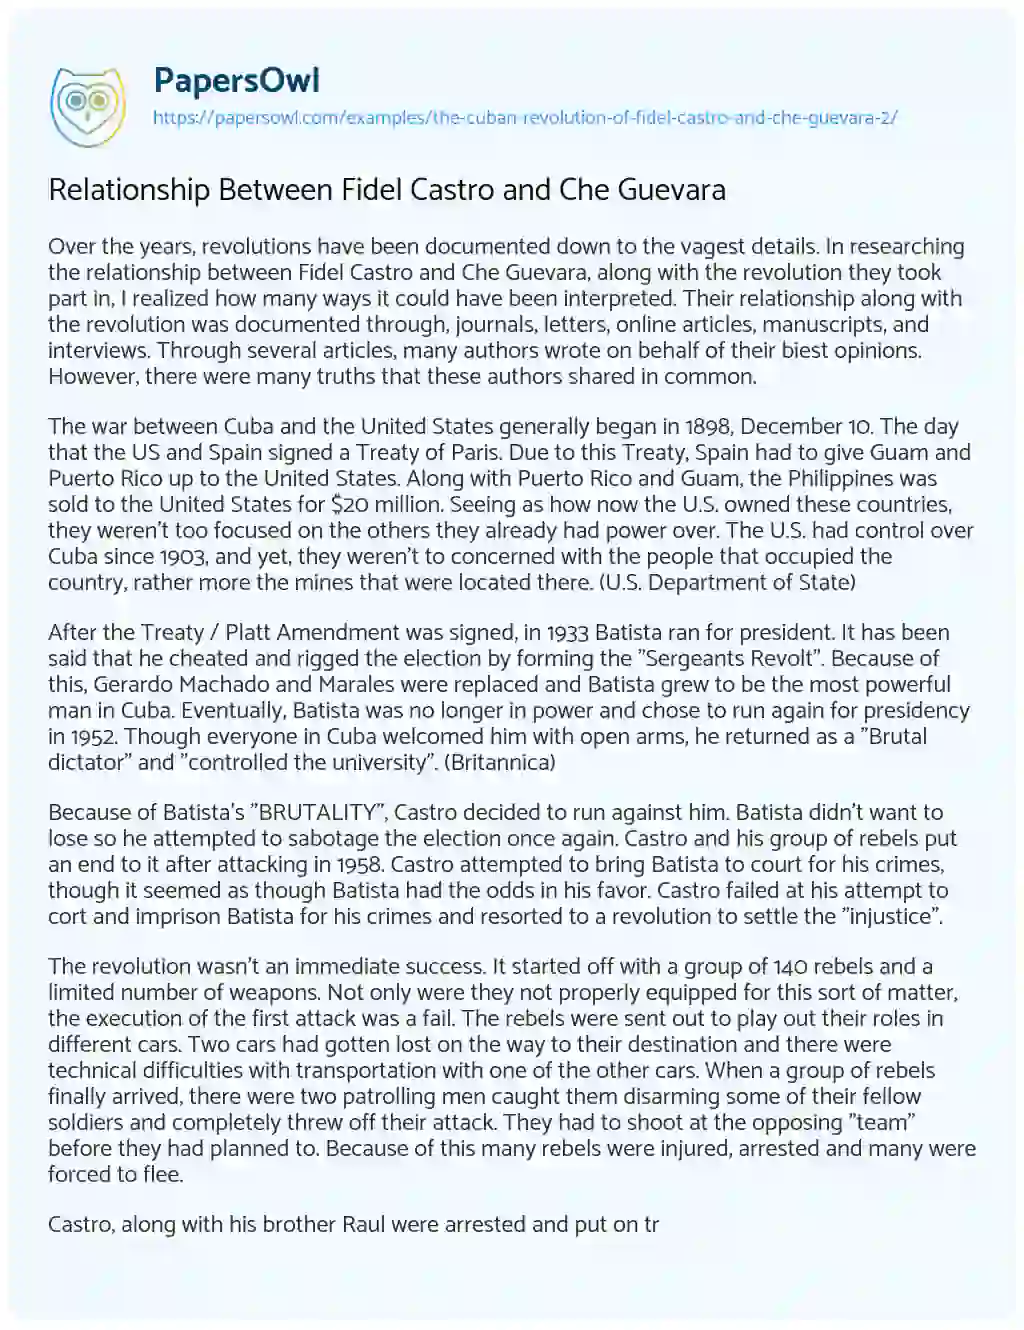 Essay on Relationship between Fidel Castro and Che Guevara